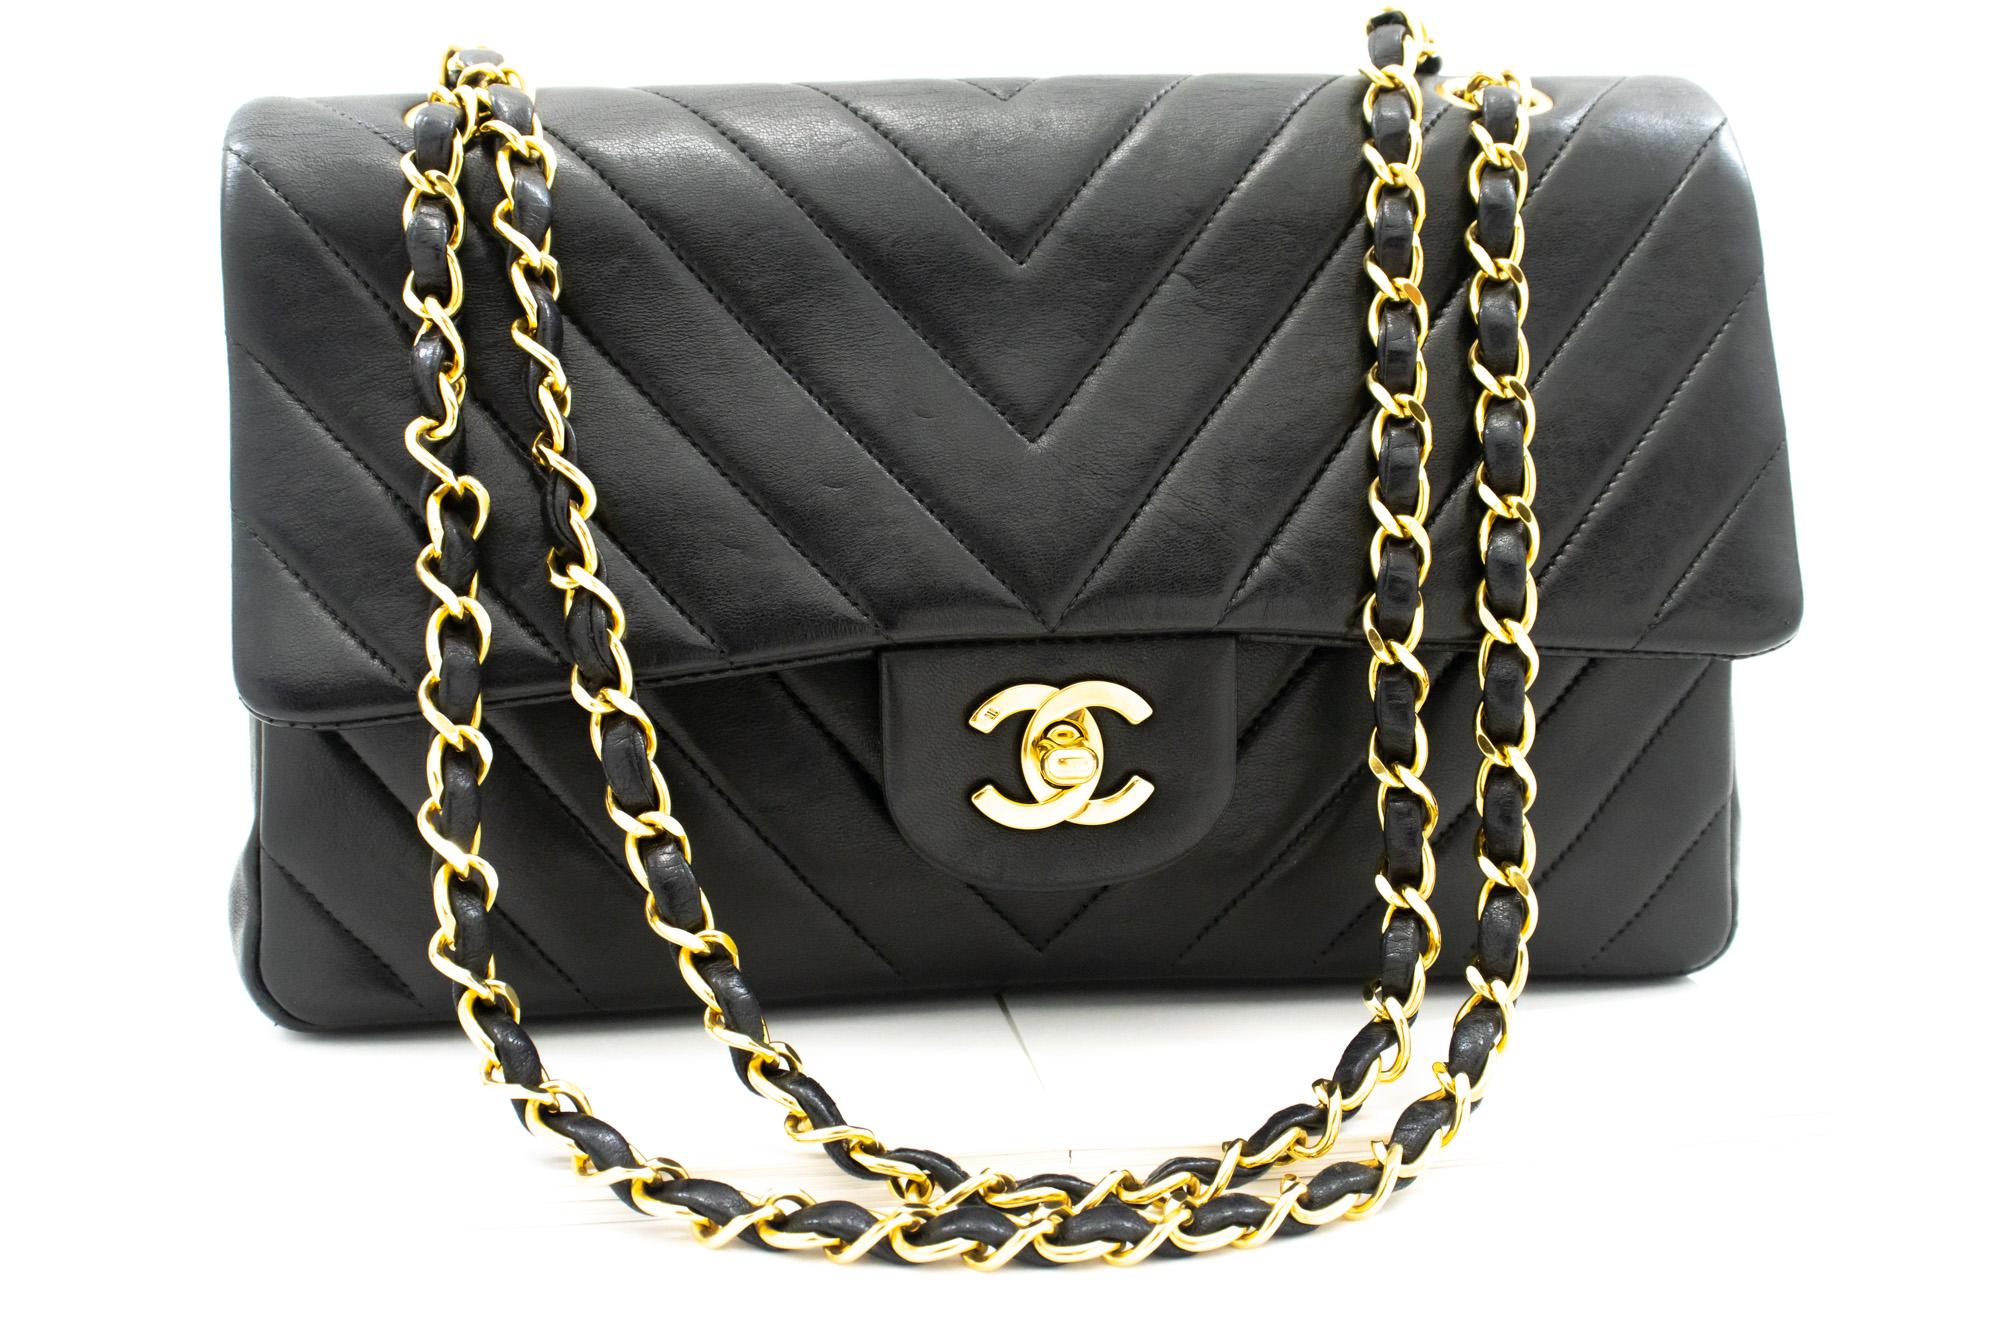 An authentic CHANEL V-Stitch Double Flap Medium Chain Shoulder Bag Black Lamb. The color is Black. The outside material is Leather. The pattern is Solid. This item is Vintage / Classic. The year of manufacture would be 1991-1994.
Conditions &